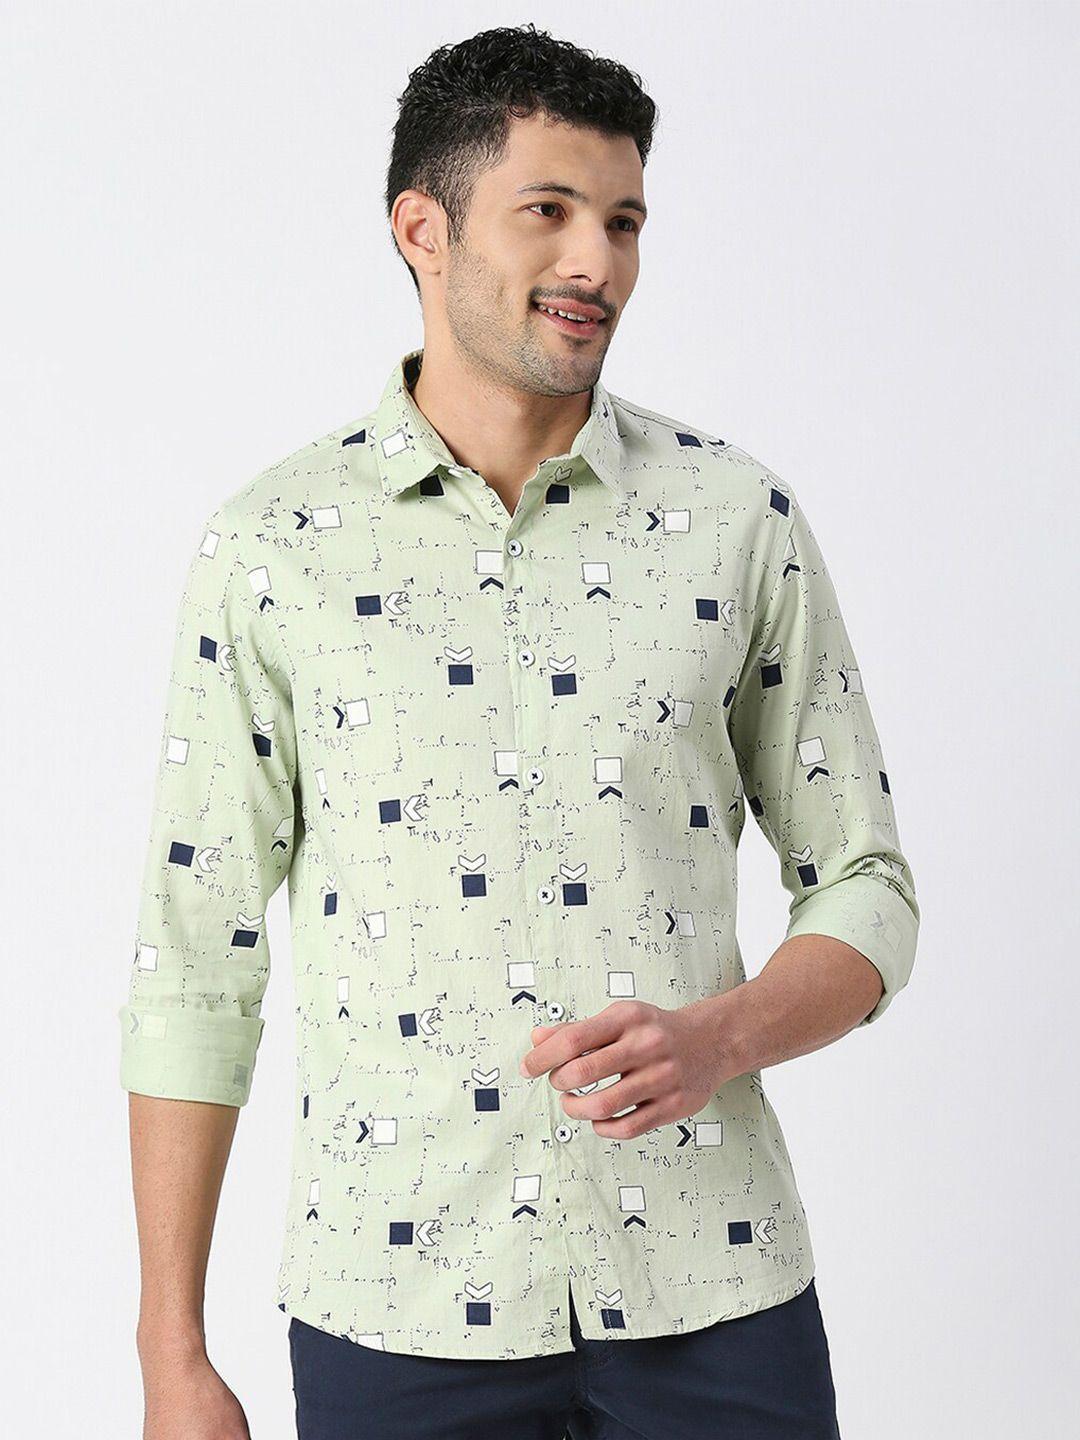 snx tailored fit geometric printed pure cotton casual shirt